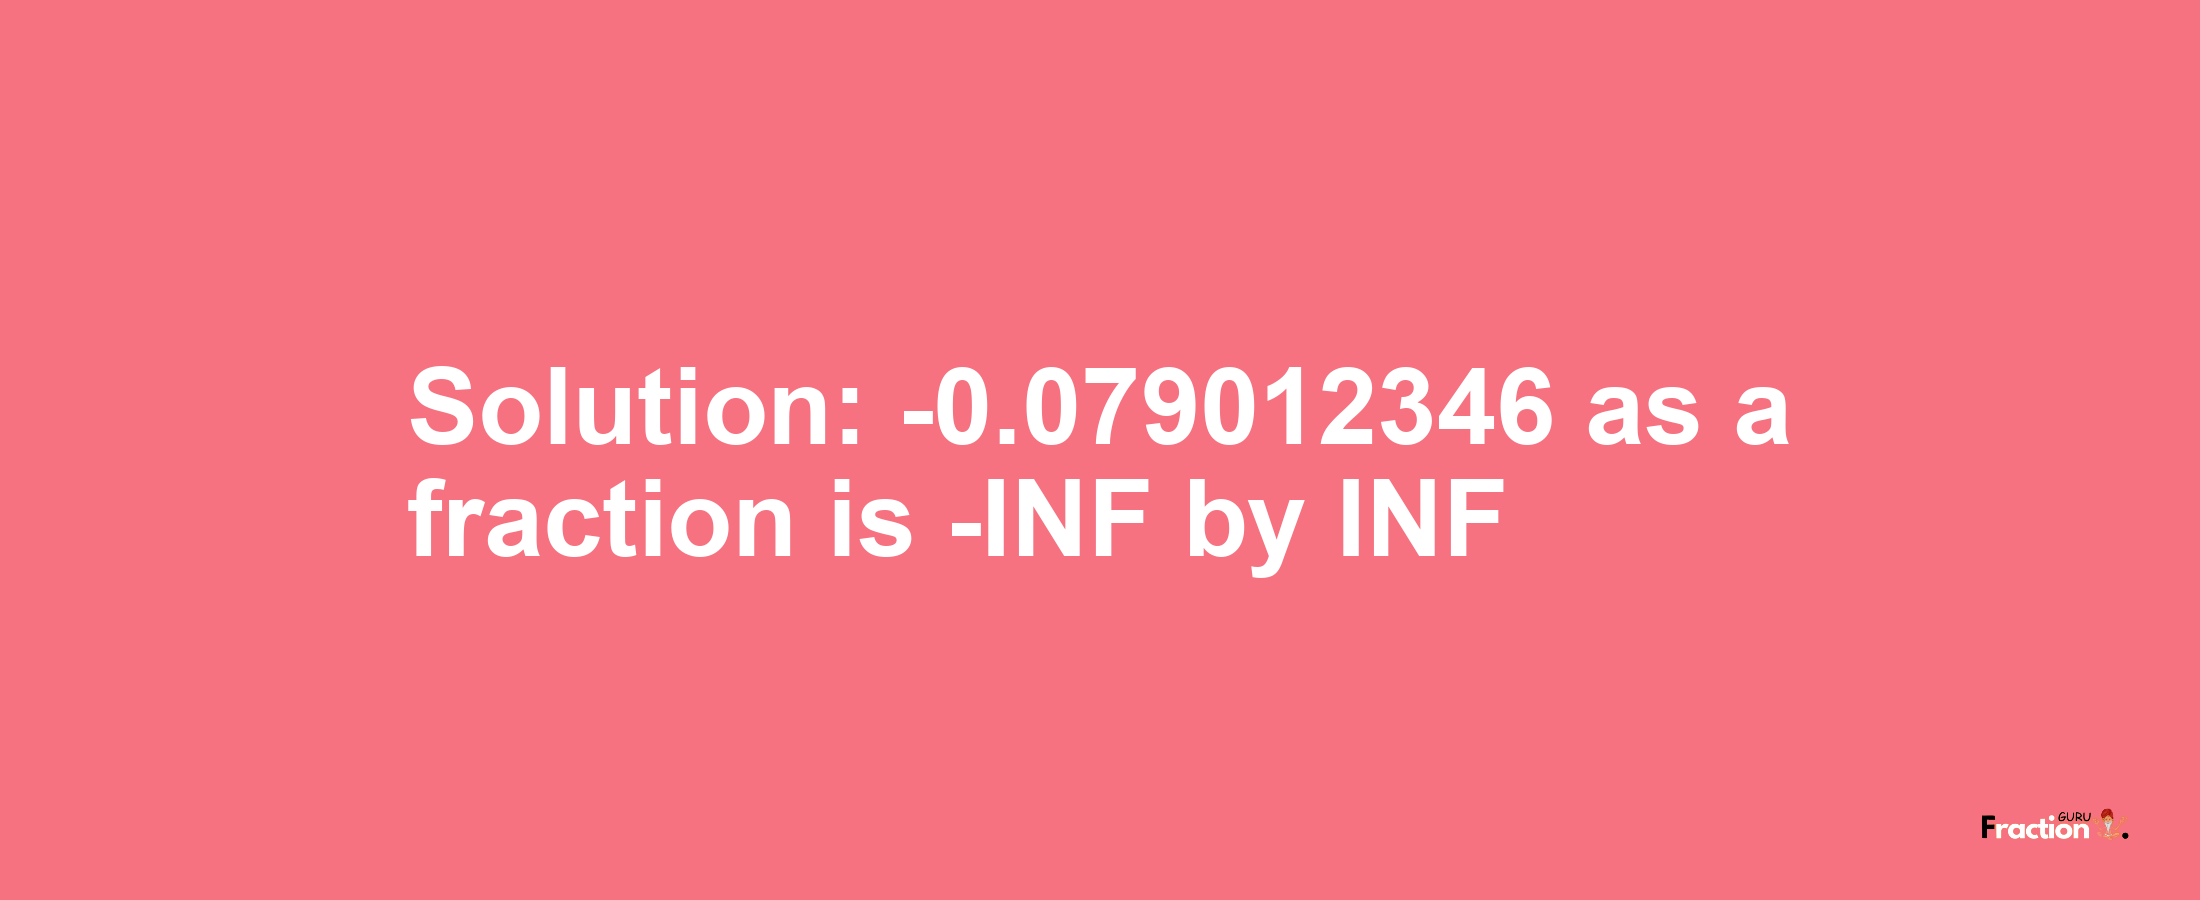 Solution:-0.079012346 as a fraction is -INF/INF